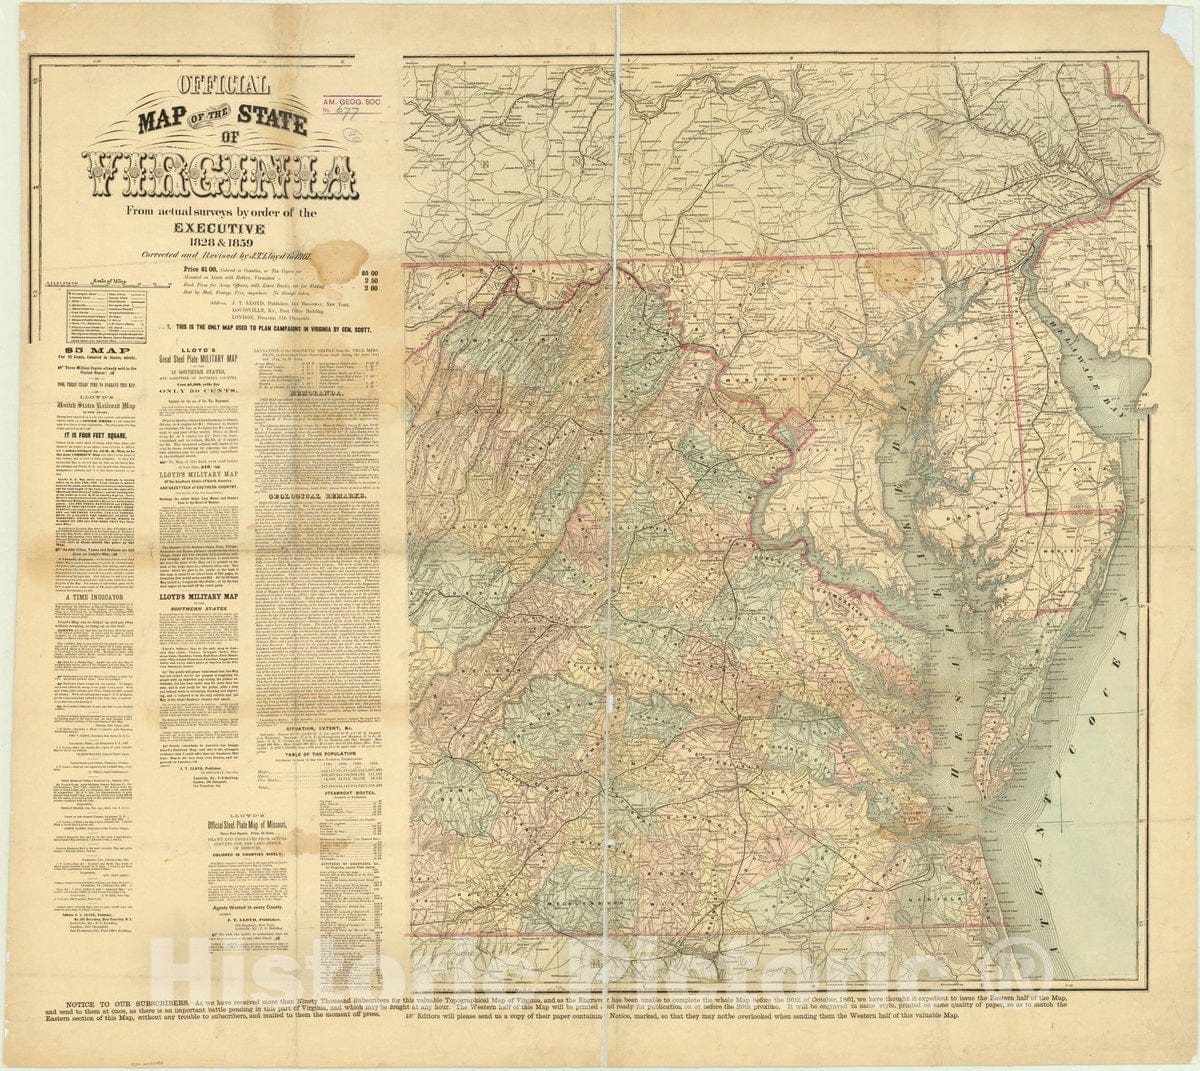 Historic Map : Virginia 1861, Official map of the state of Virginia : from actual surveys by order of the executive, 1828 & 1859 [eastern half of map], Antique Vintage Reproduction